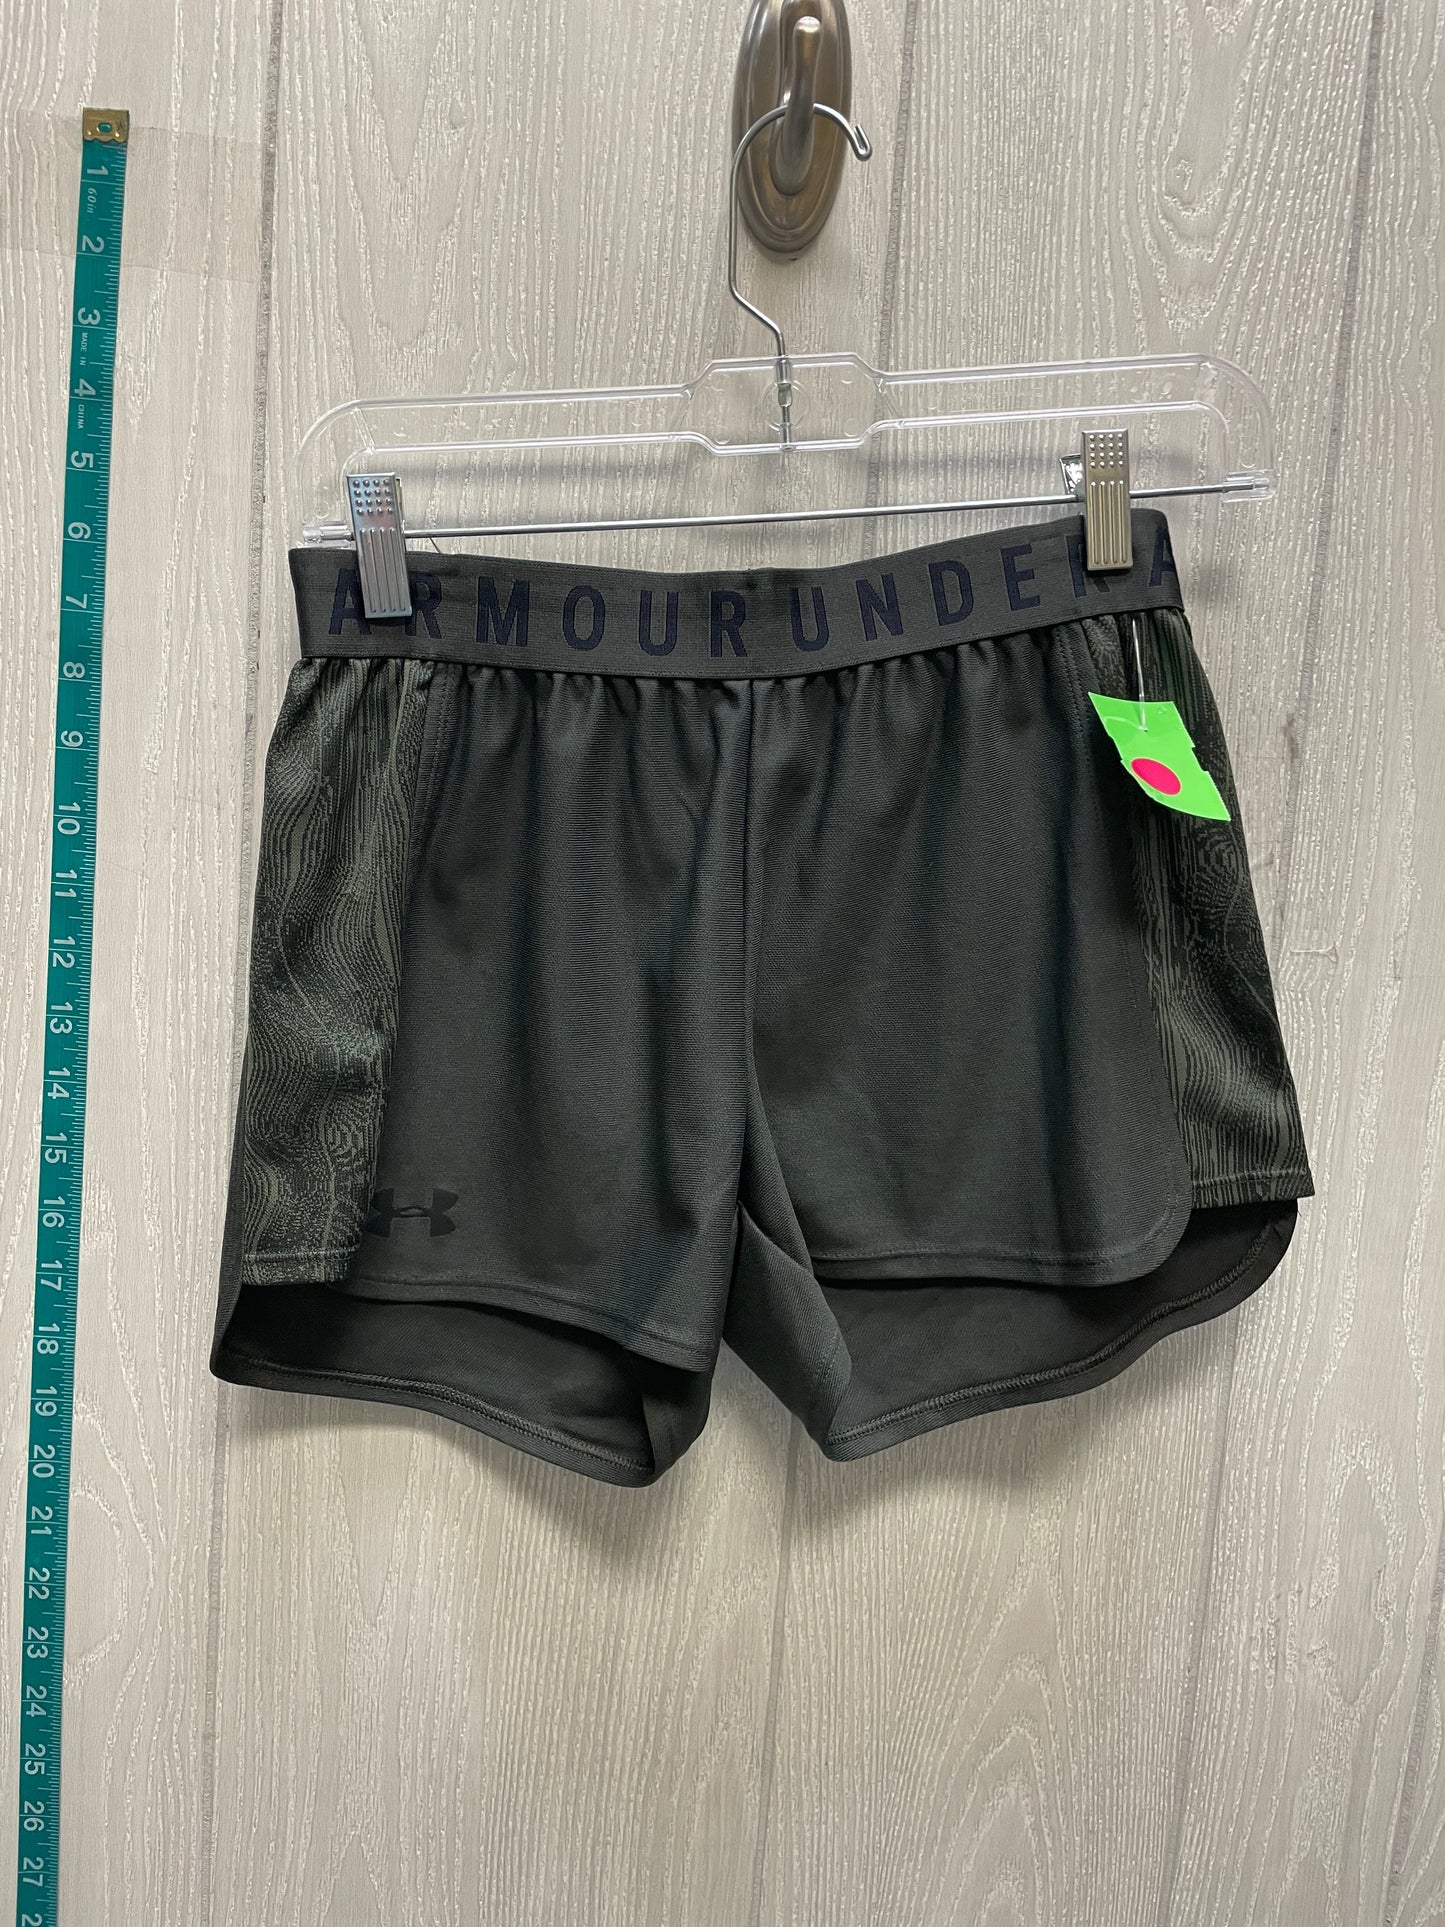 Green Athletic Shorts Under Armour, Size Xs